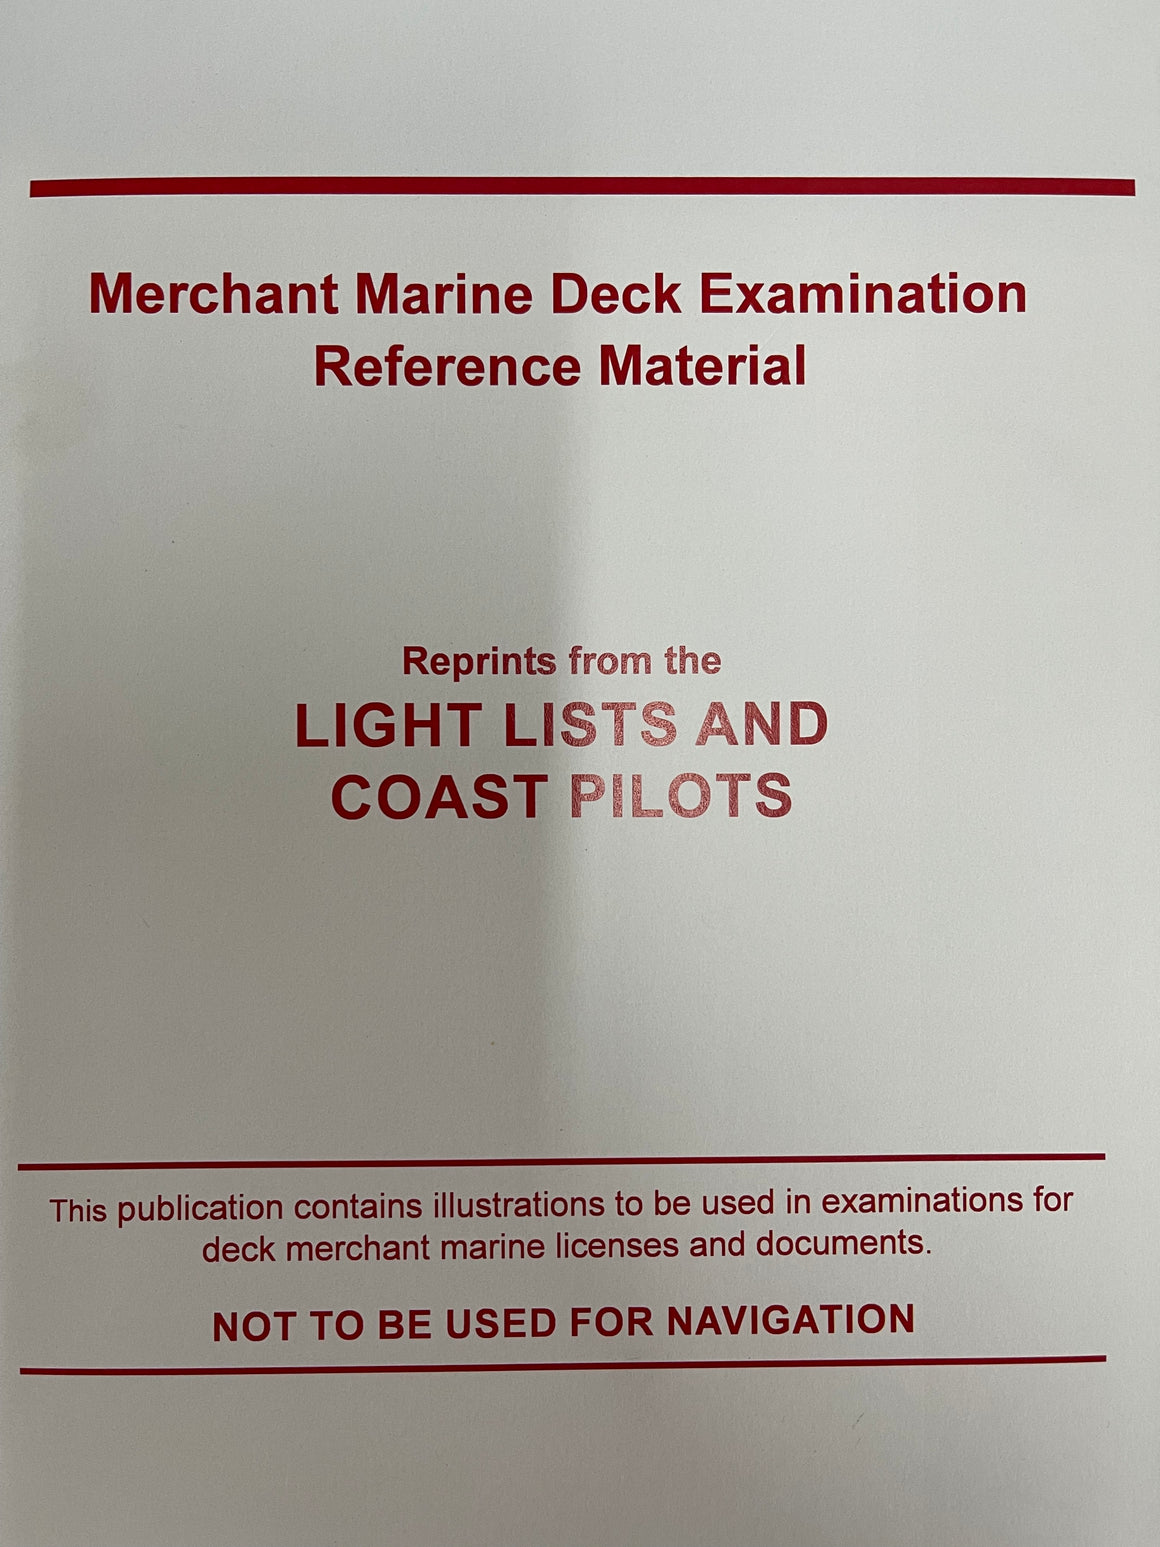 Reference Material - Reprints from the Light Lists and Coast Pilots